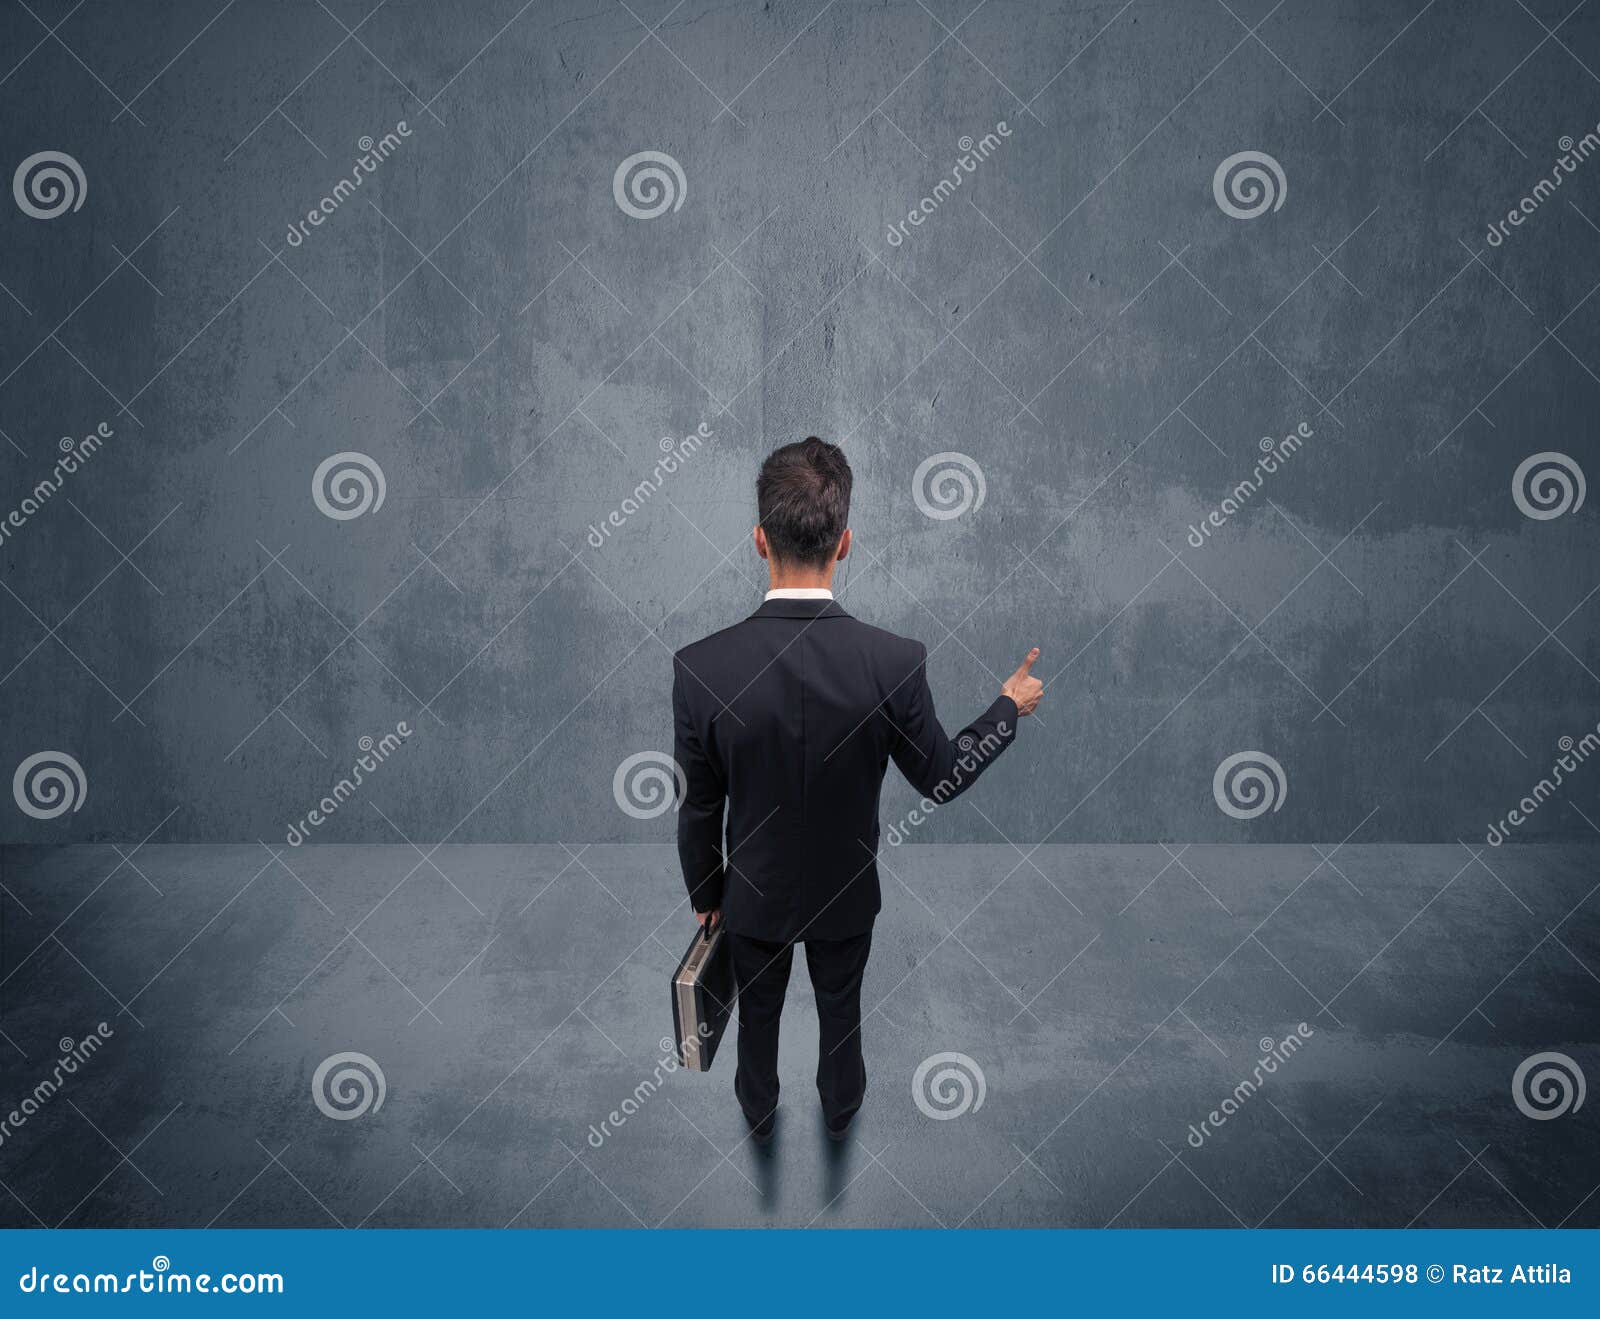 Businessman Standing in Front of Urban Wall Stock Photo - Image of ...